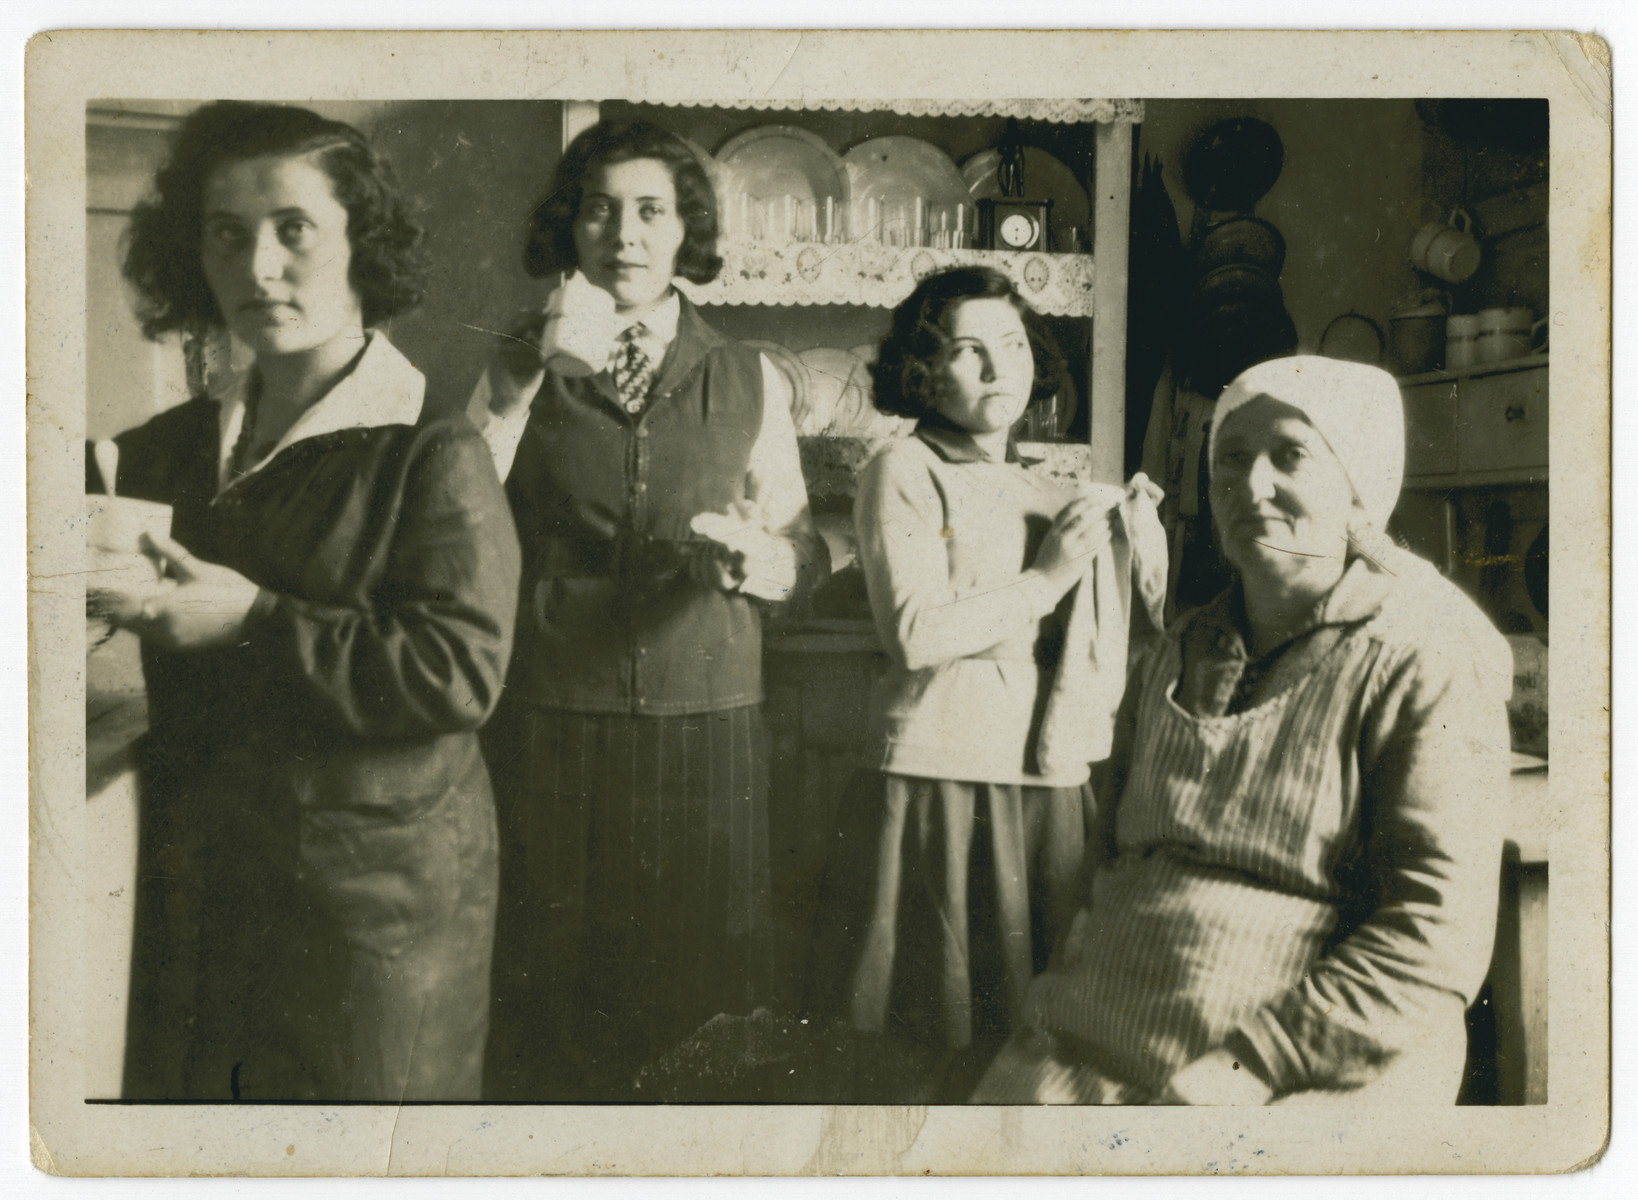 Jechet Kielmanowicz sits in her kitchen surrounded by three of her daughters.

Pictured from left to right is Ida (Jetta), Gisa, either Simcha or Esther and Jechet Kielmanowicz.